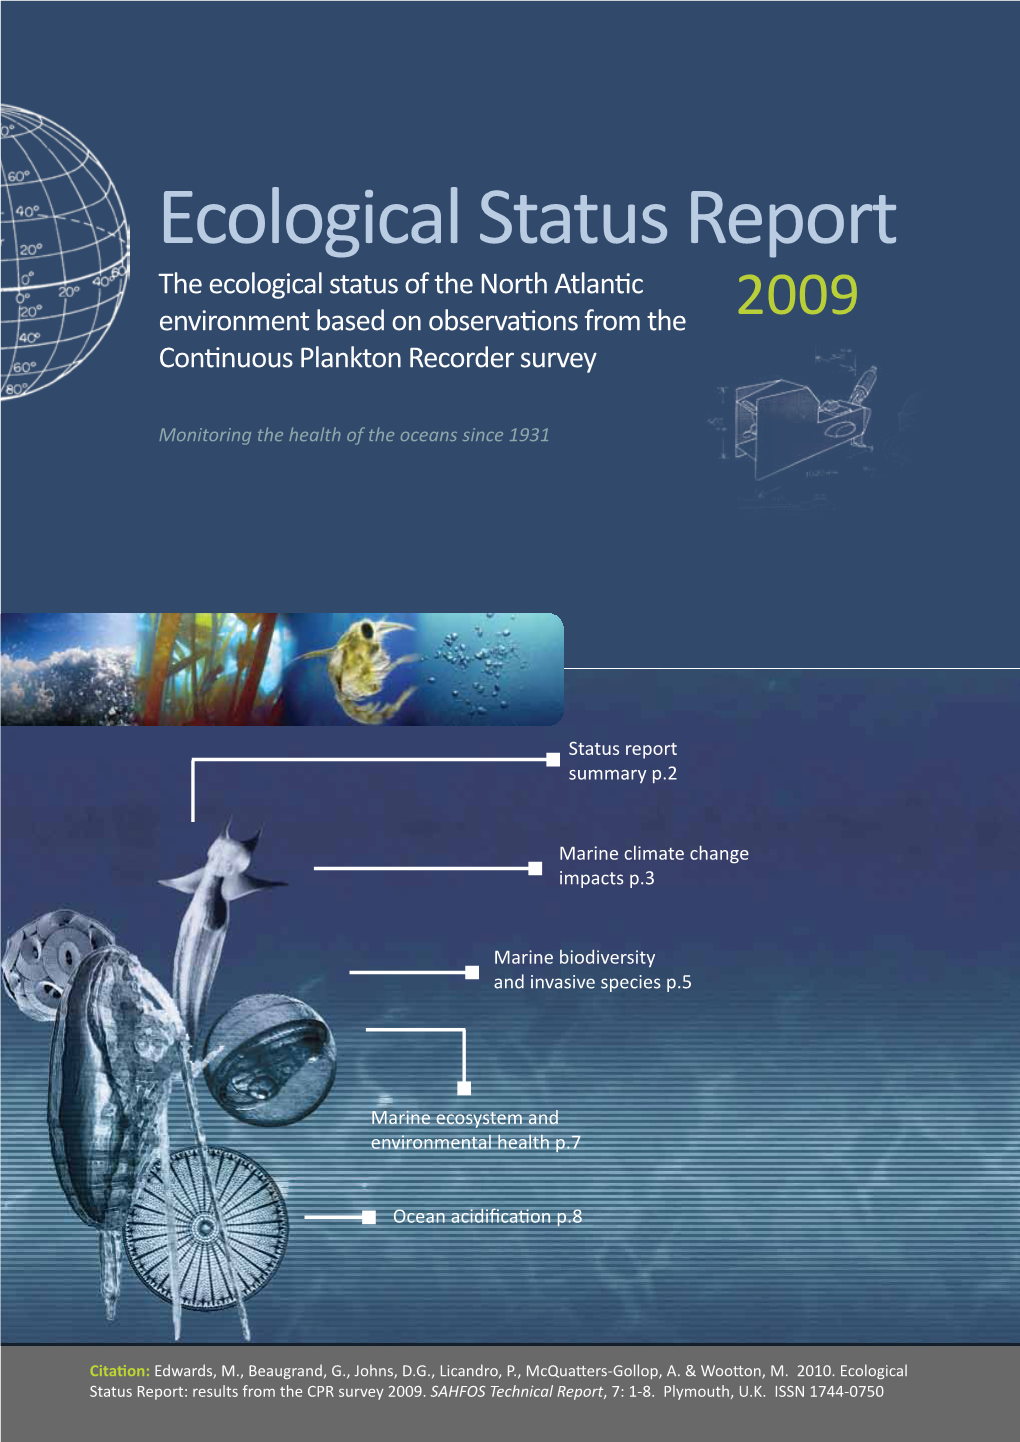 Ecological Status Report the Ecological Status of the North Atlantic Environment Based on Observations from the 2009 Continuous Plankton Recorder Survey